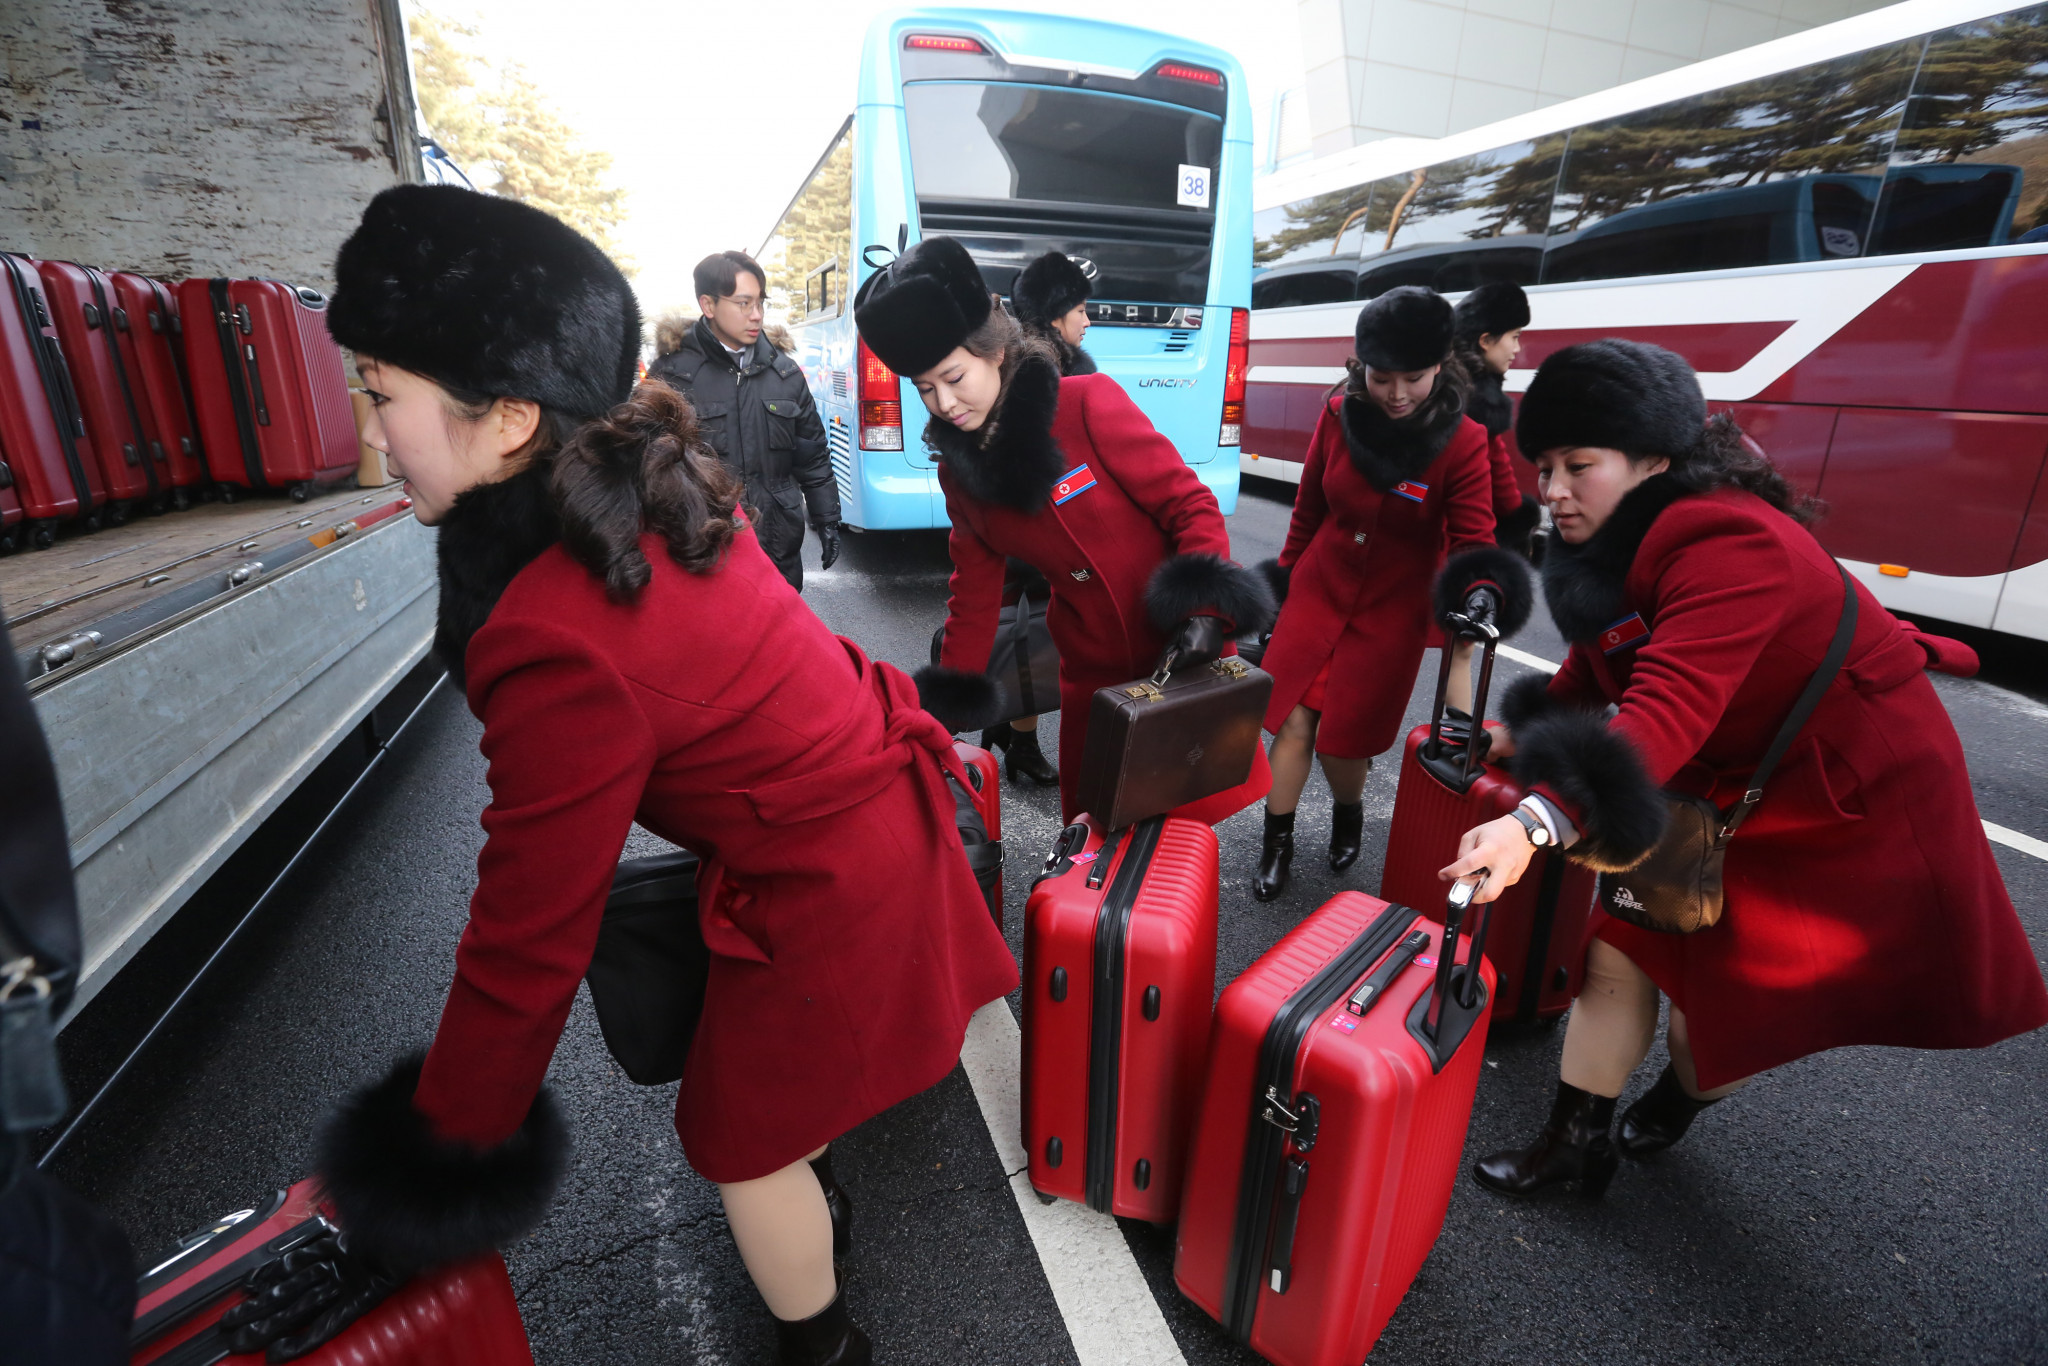 The cheerleaders who arrived over the border today were part of a delegation of 280 from North Korea to support their team during the Winter Olympics at Pyeongchang 2018 ©Getty Images